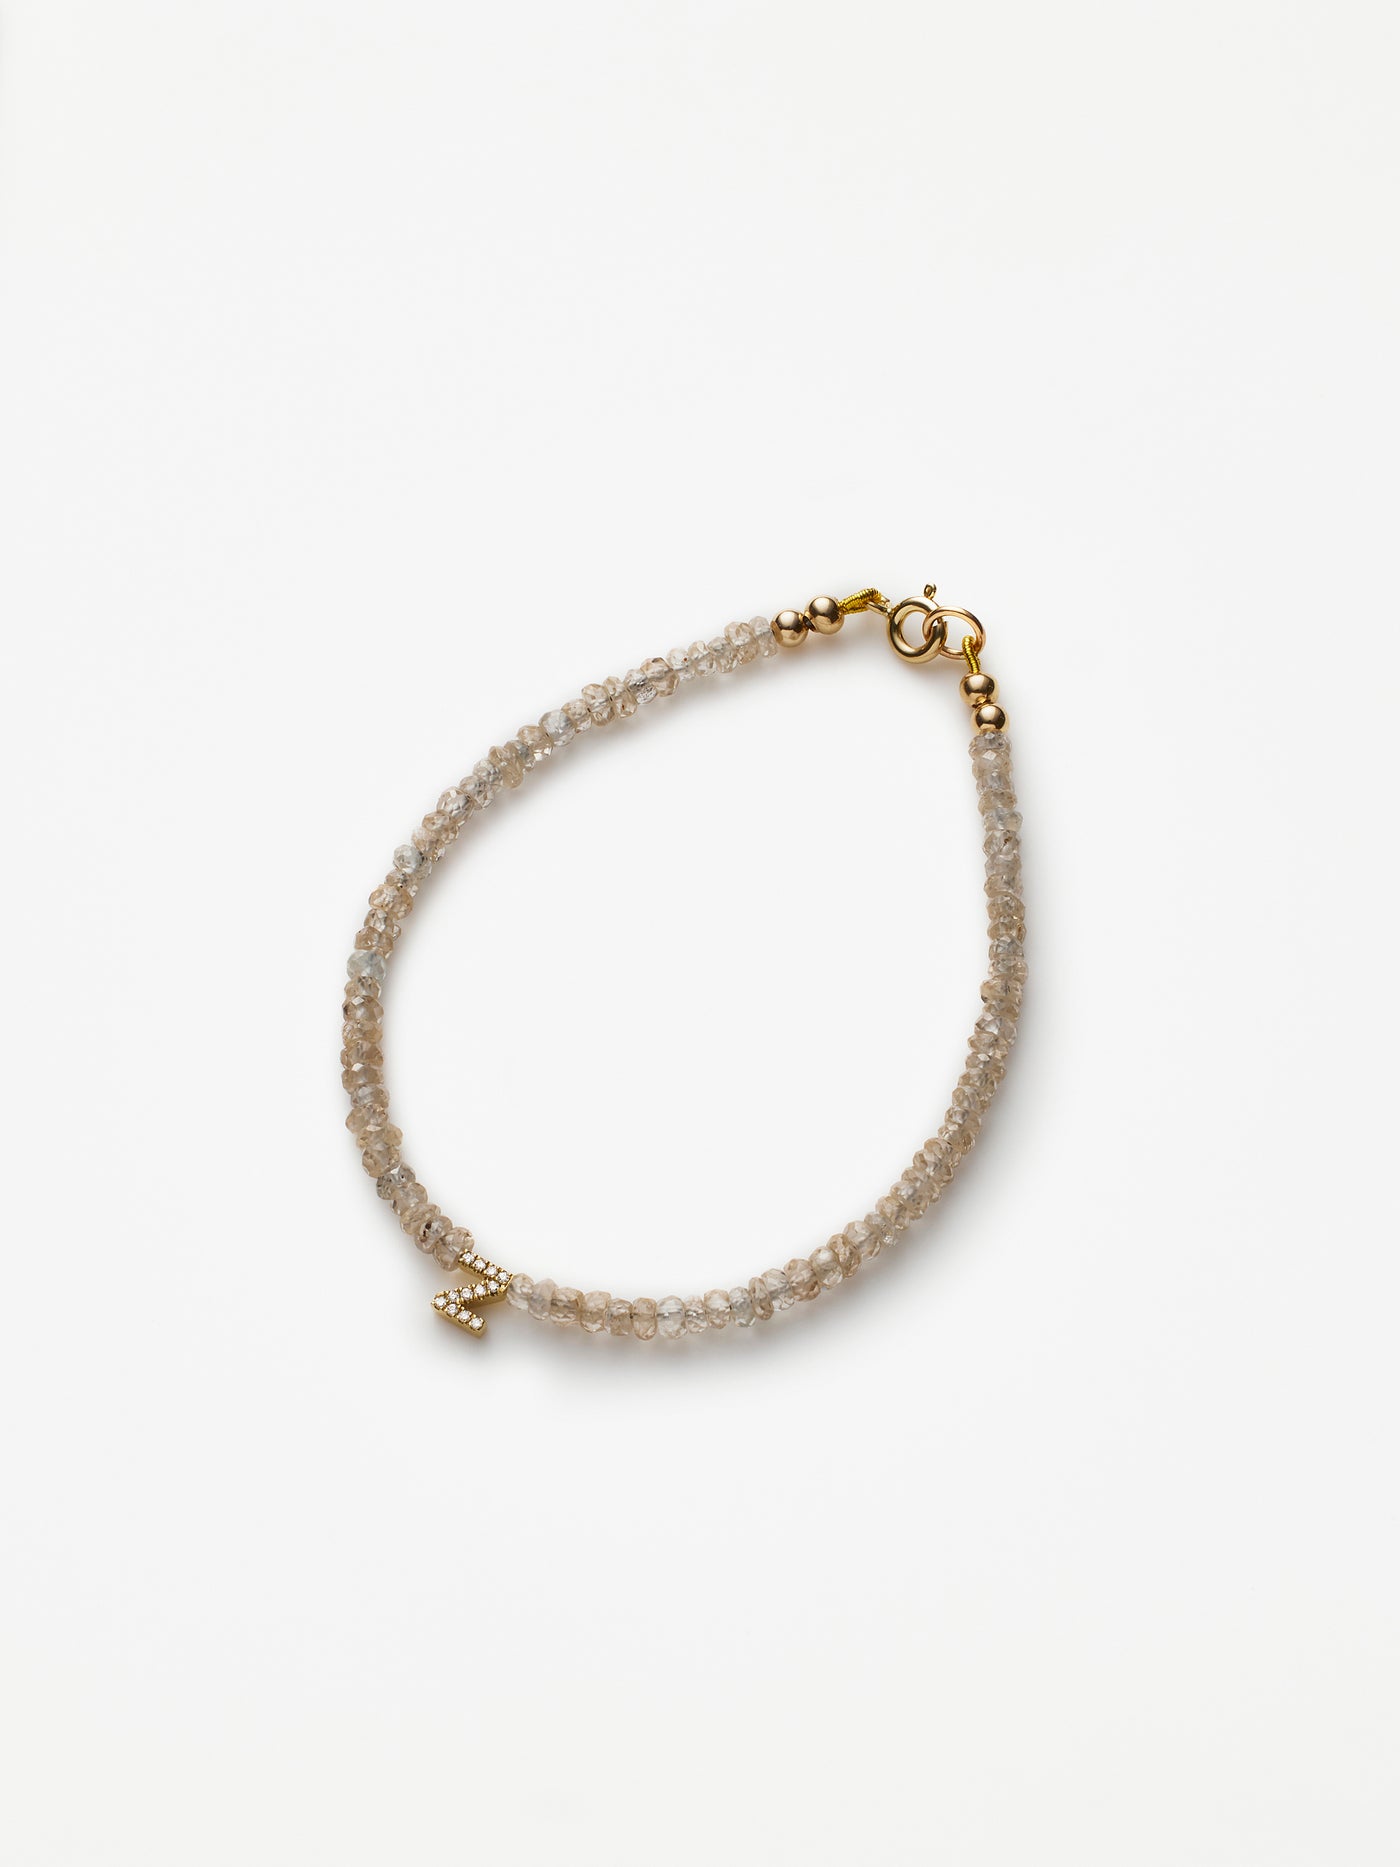 Hand-strung bracelet with natural natural zircon gemstones and miniature three-dimensional diamond letter in 18k solid gold